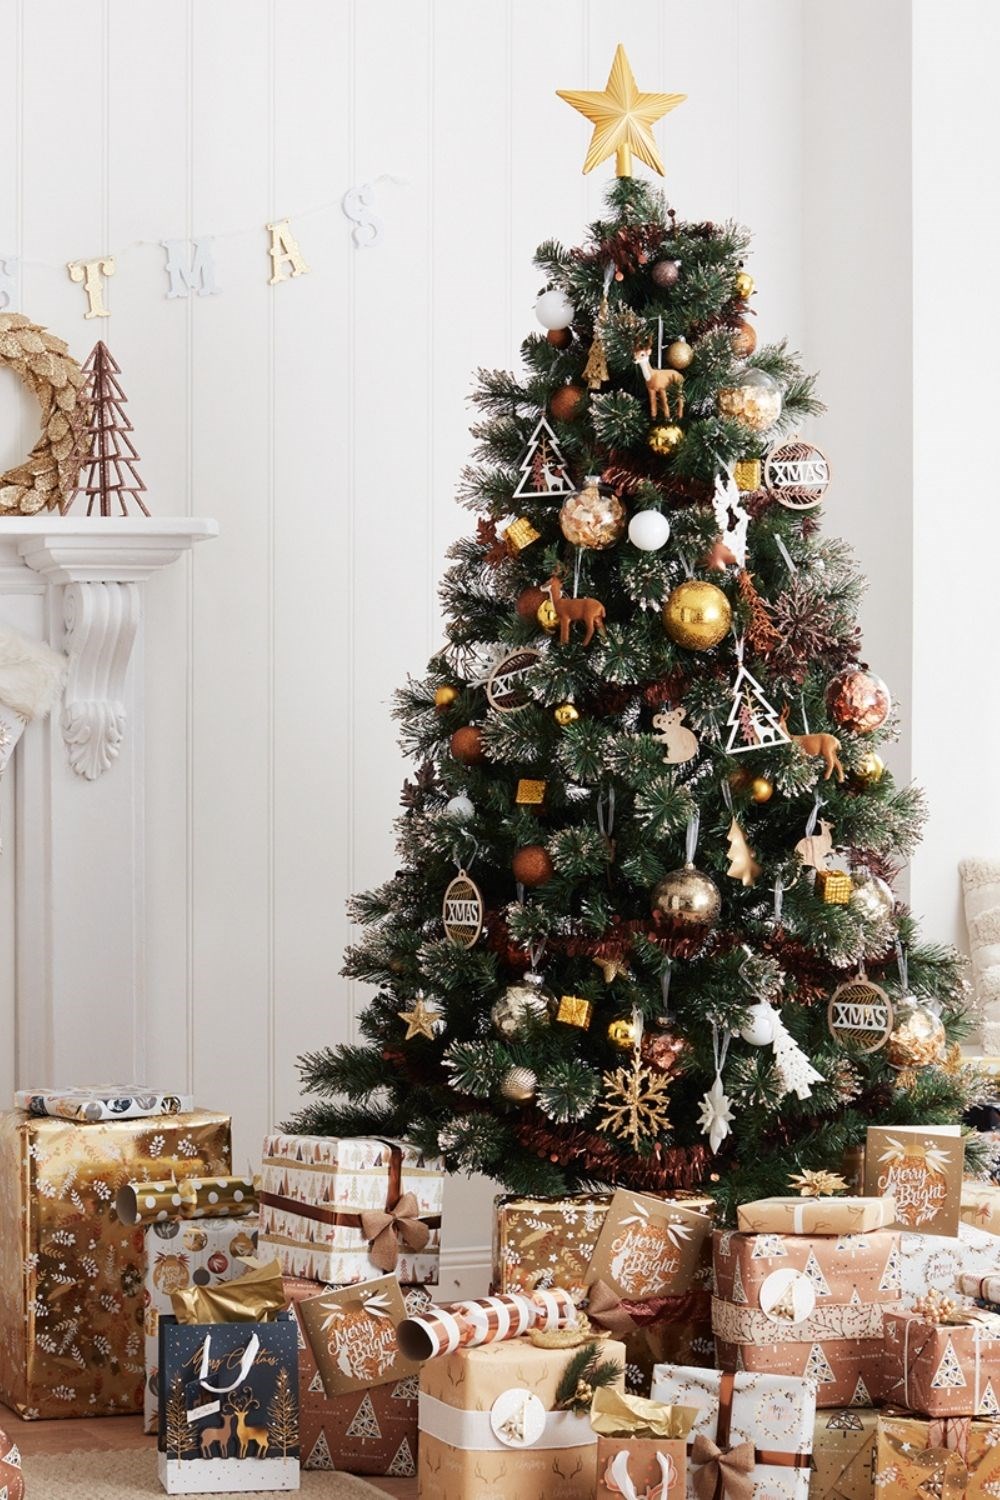 Big W's 2020 Christmas range has arrived | Better Homes and Gardens